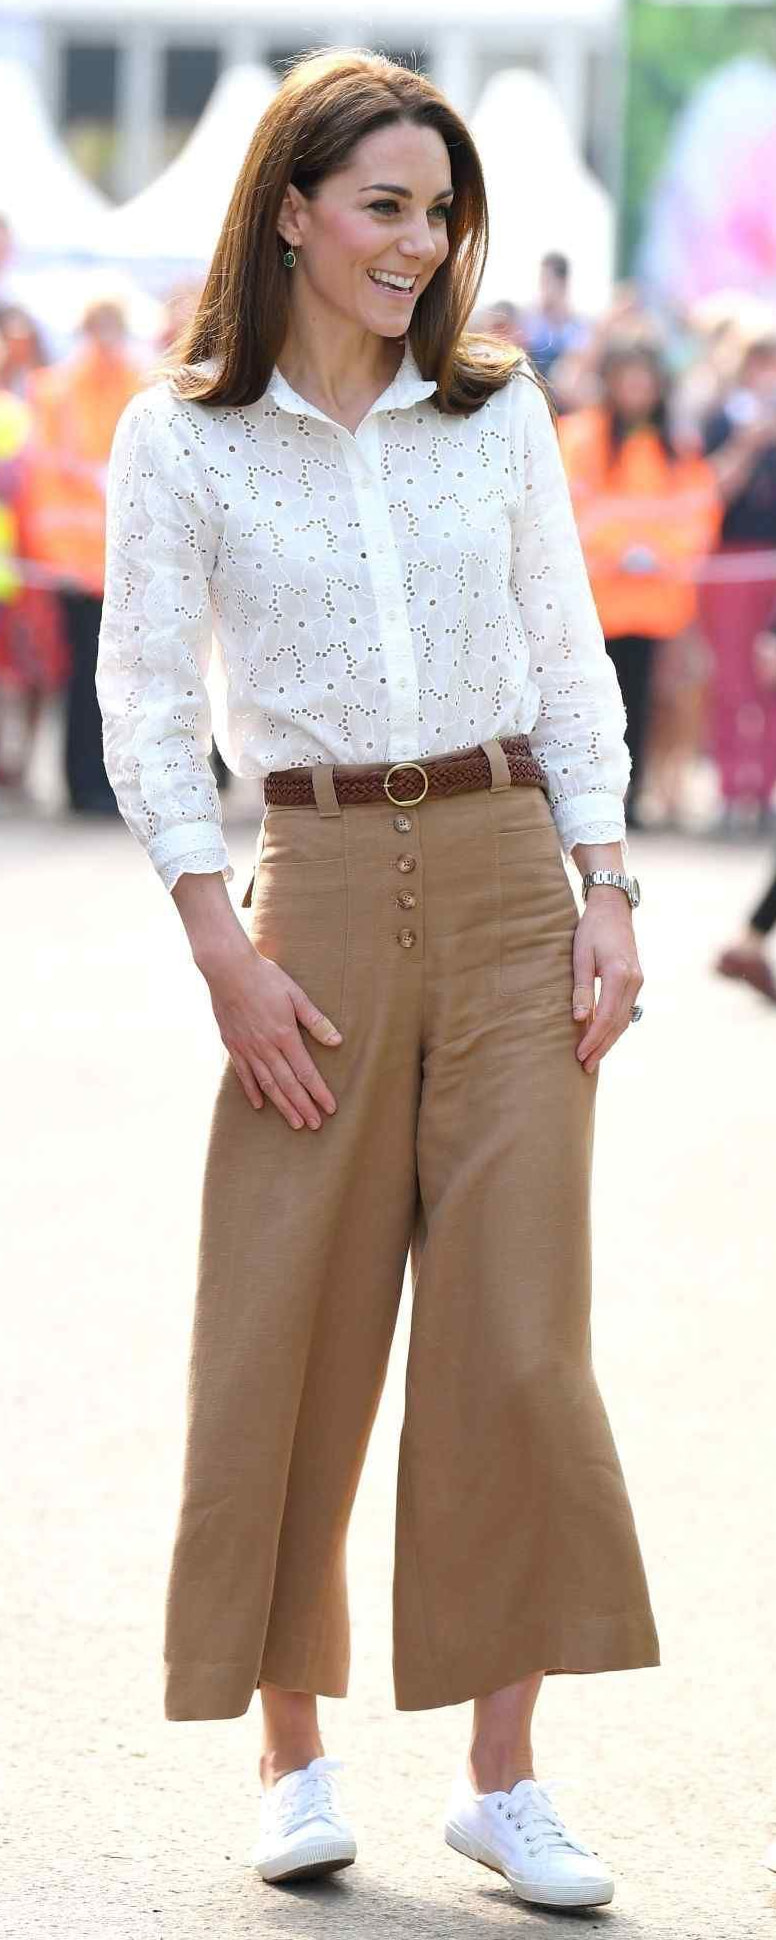 Mulberry Braided Belt in Tan as seen on Kate Middleton, the Duchess of Cambridge.